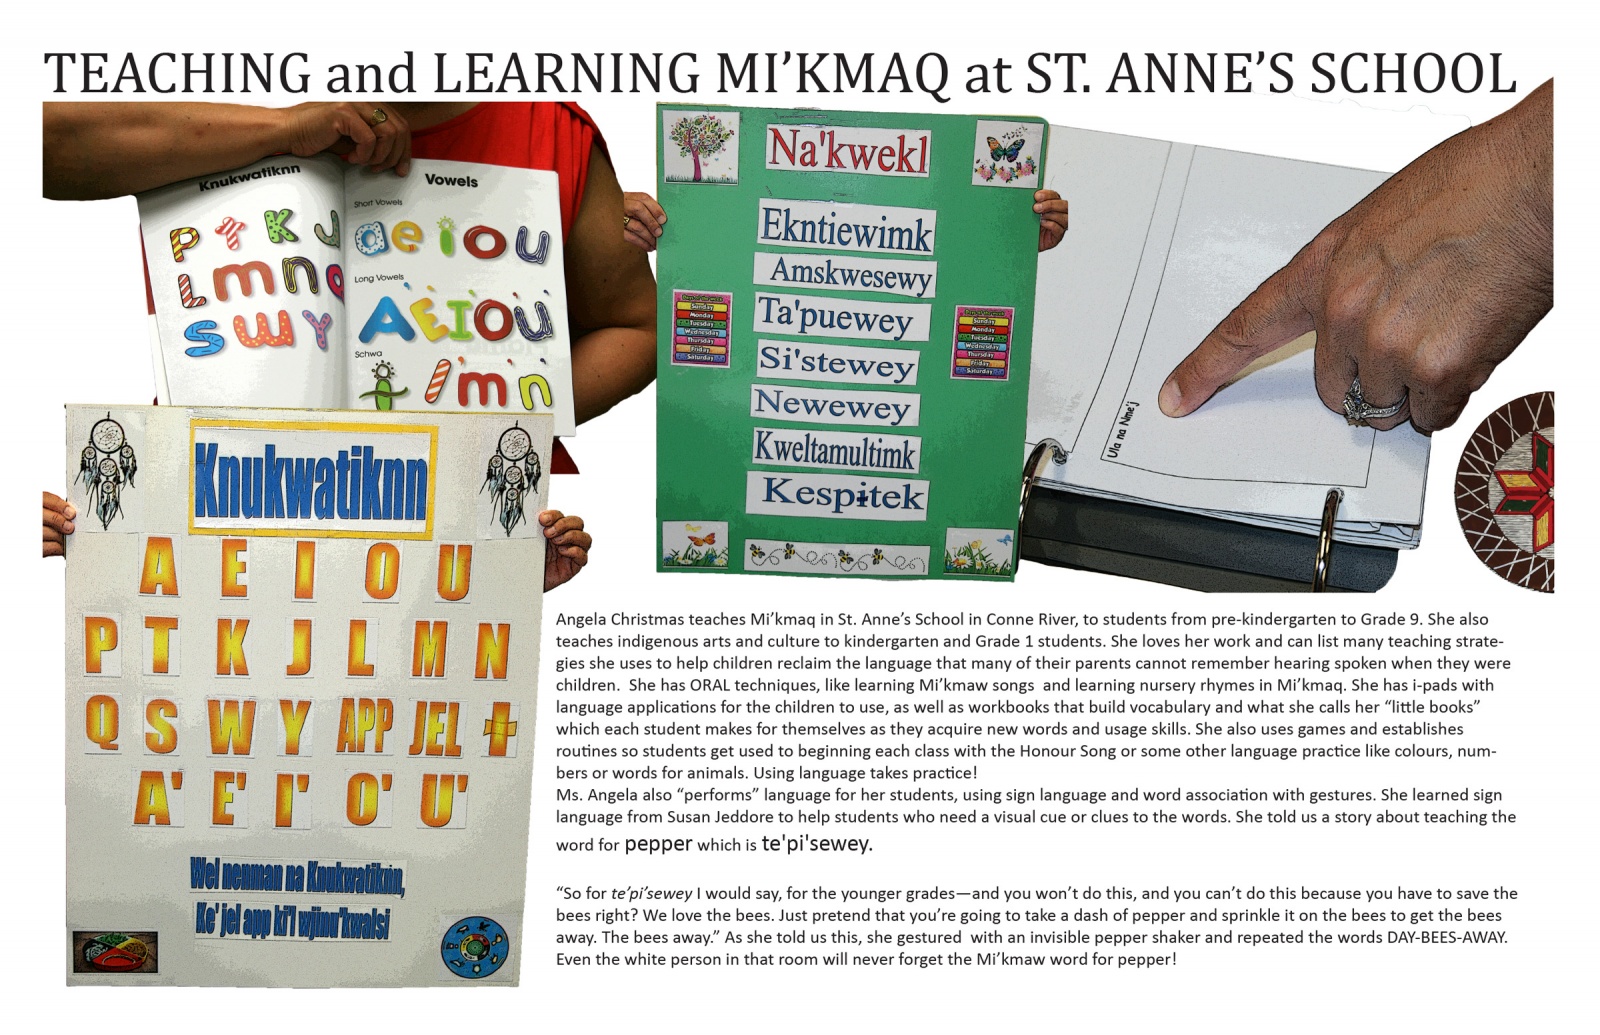 Teaching and Learning Mi’kmaq at St. Anne’s School